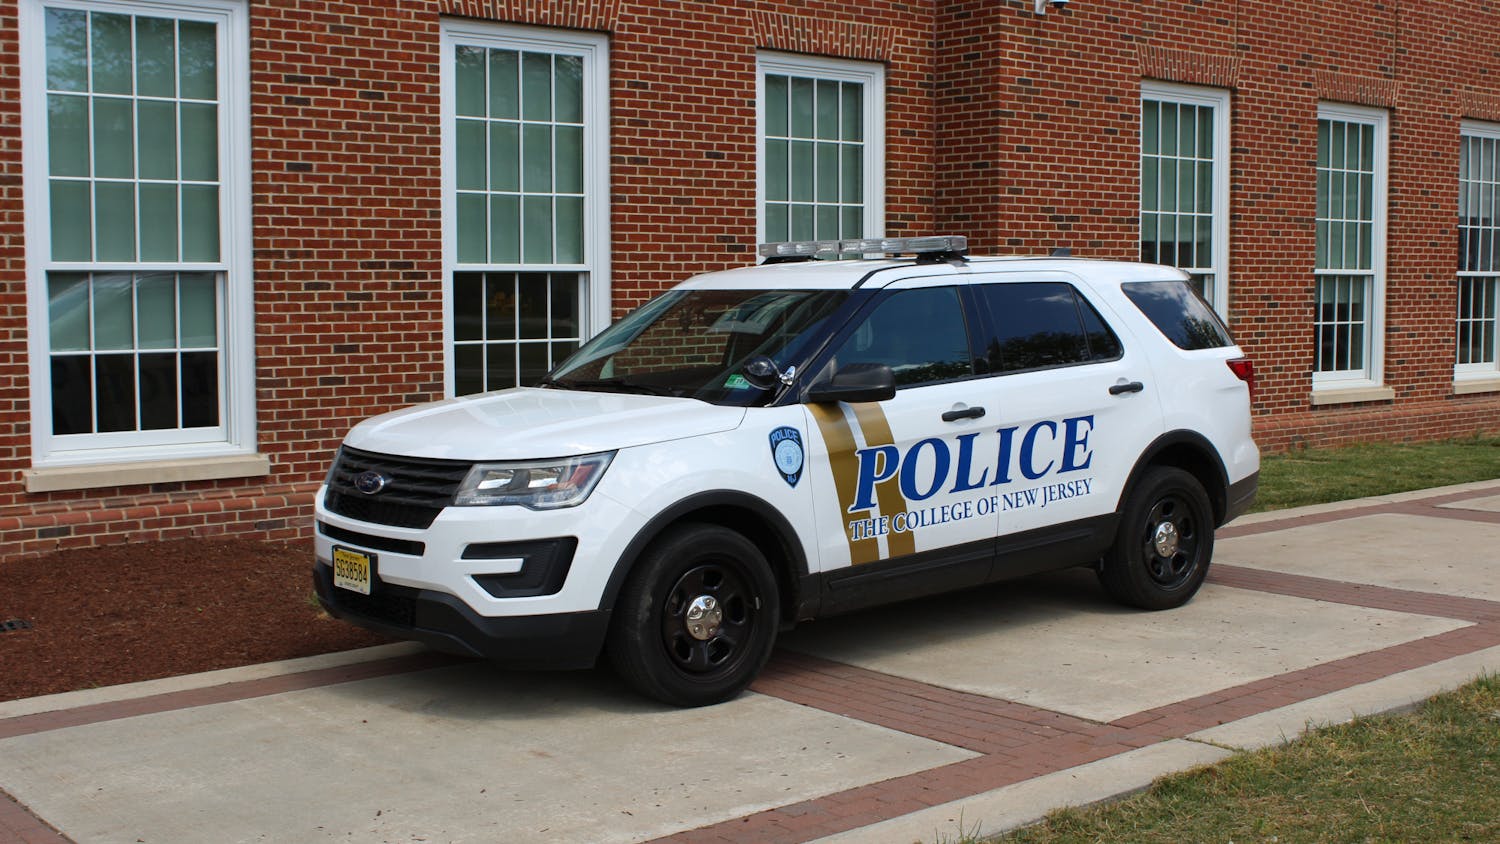 Some students suggested giving more time to complete the training and including more information that is specific to the College, such as highlighting Campus Police’s 24-Hour Safe Walk Service (Photo by Shane Gillespie / Photo Editor).